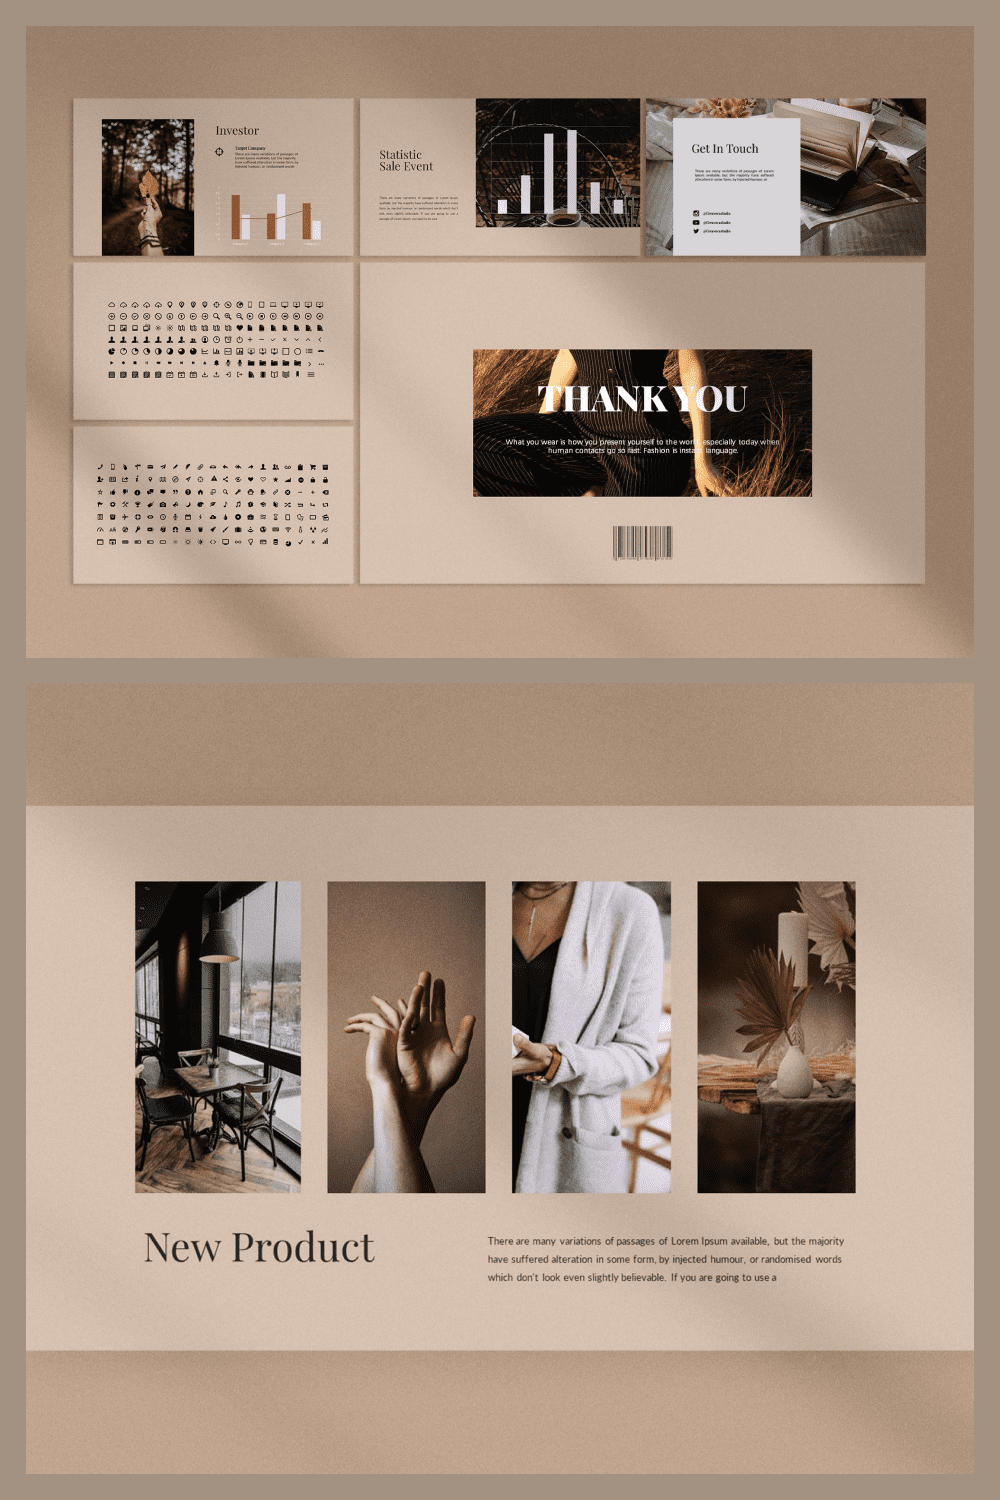 This Presentation template contains modern, minimalist, fashion, elegant, creative, professional and unique layouts.